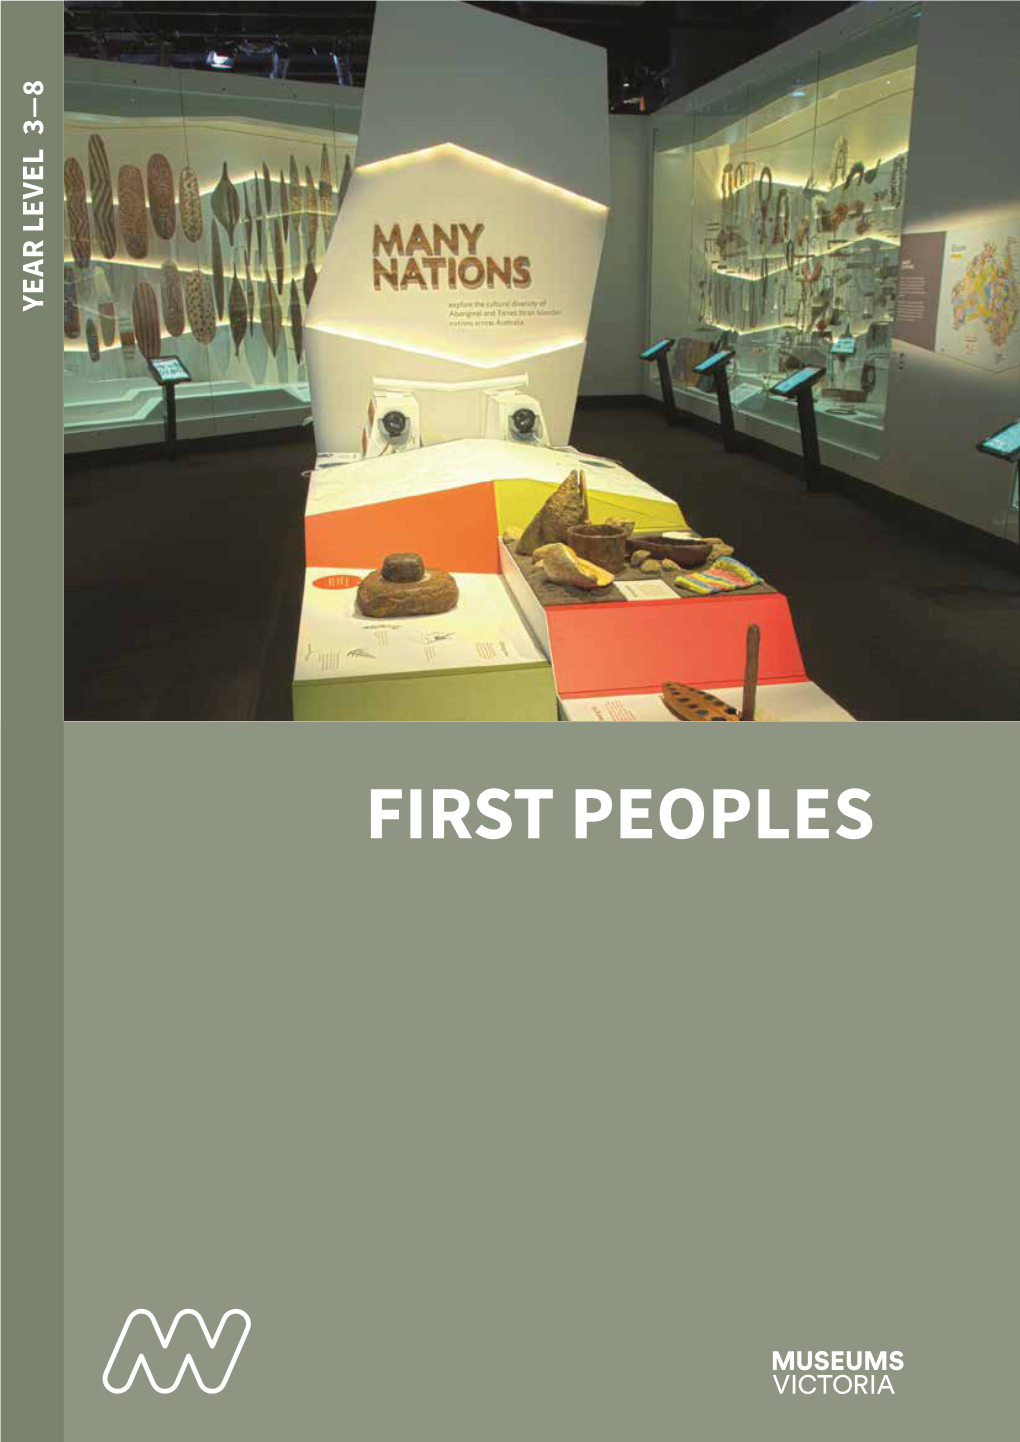 FIRST PEOPLES the Many Nations Section of the Exhibition Showcases the Diverse Cultures of First Peoples Across Australia